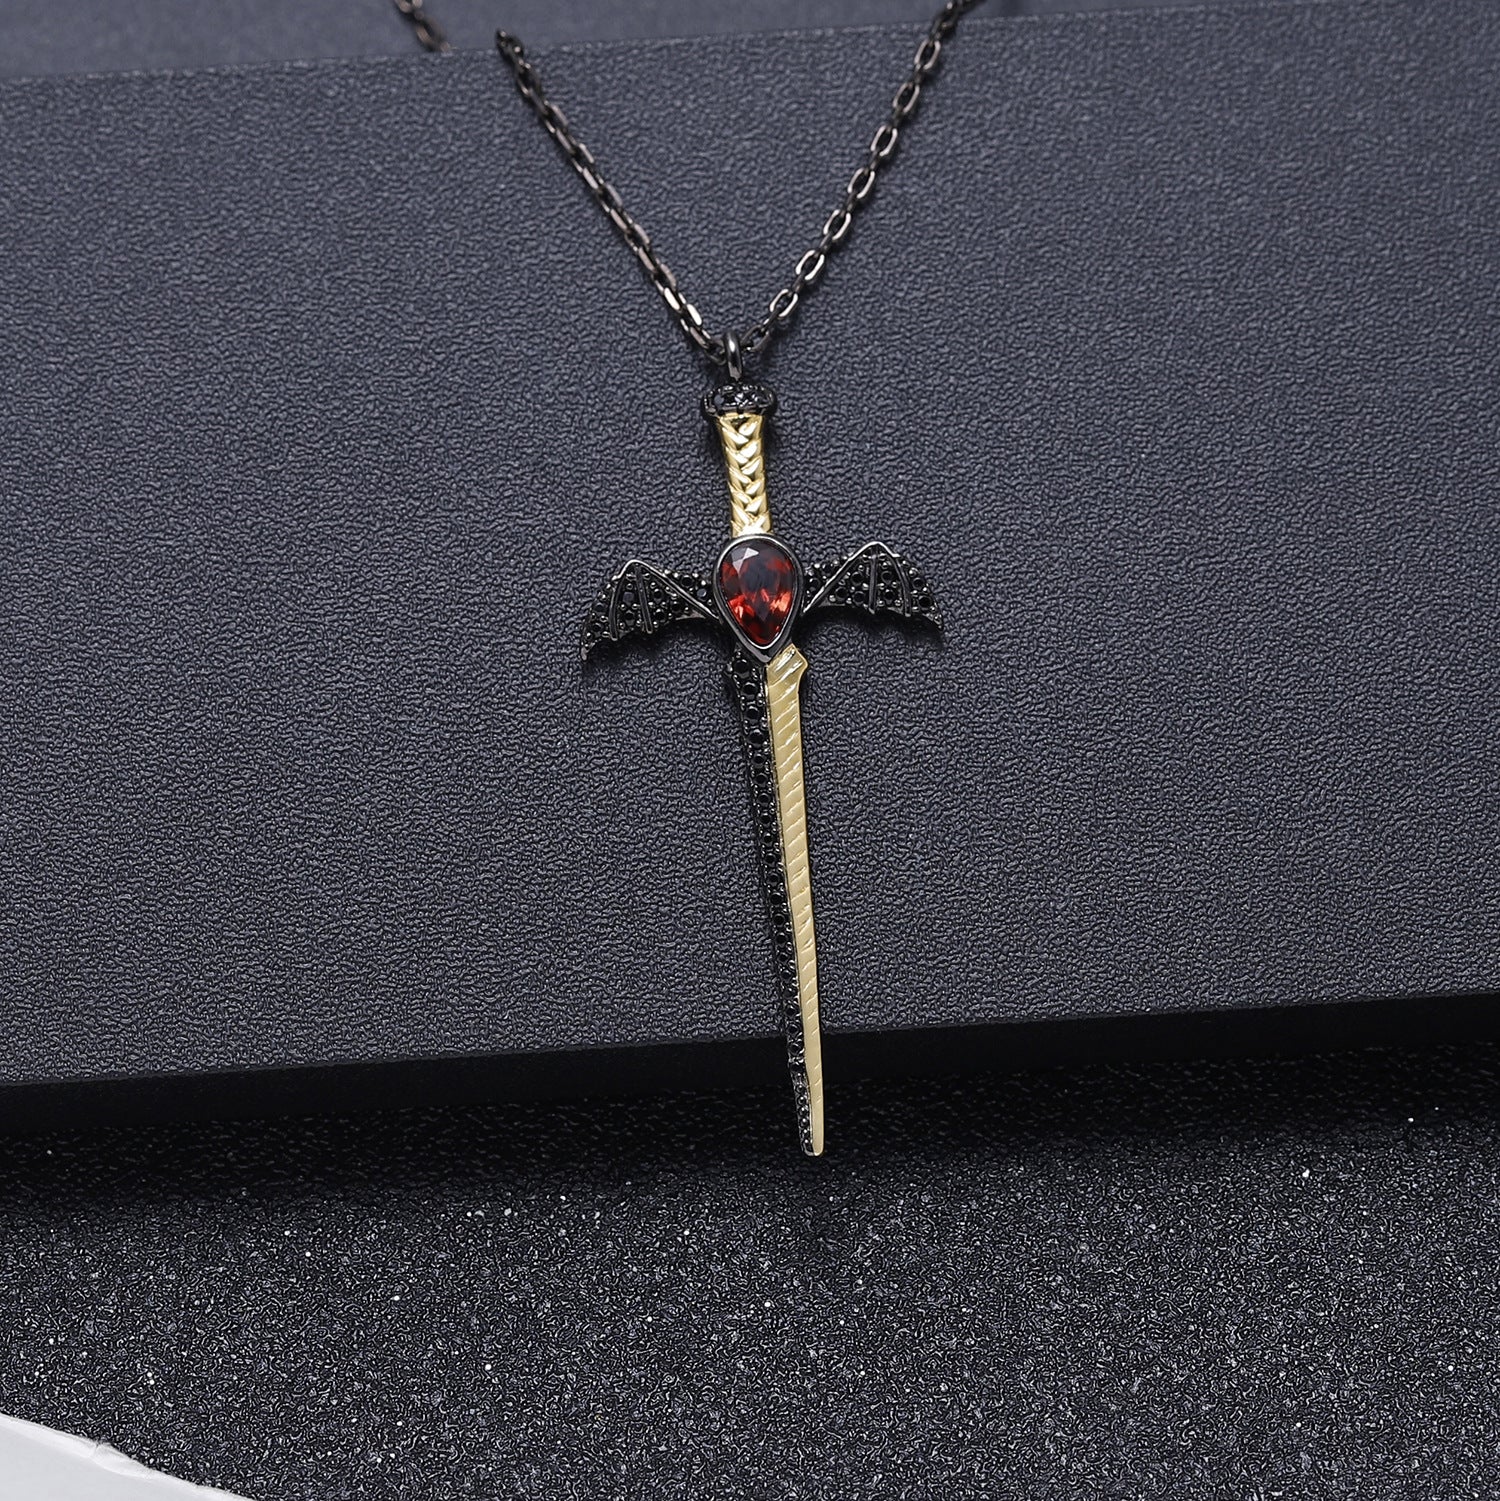 Gothic Style Dagger Design Natural Cystal Pendant Silver Necklace for Women